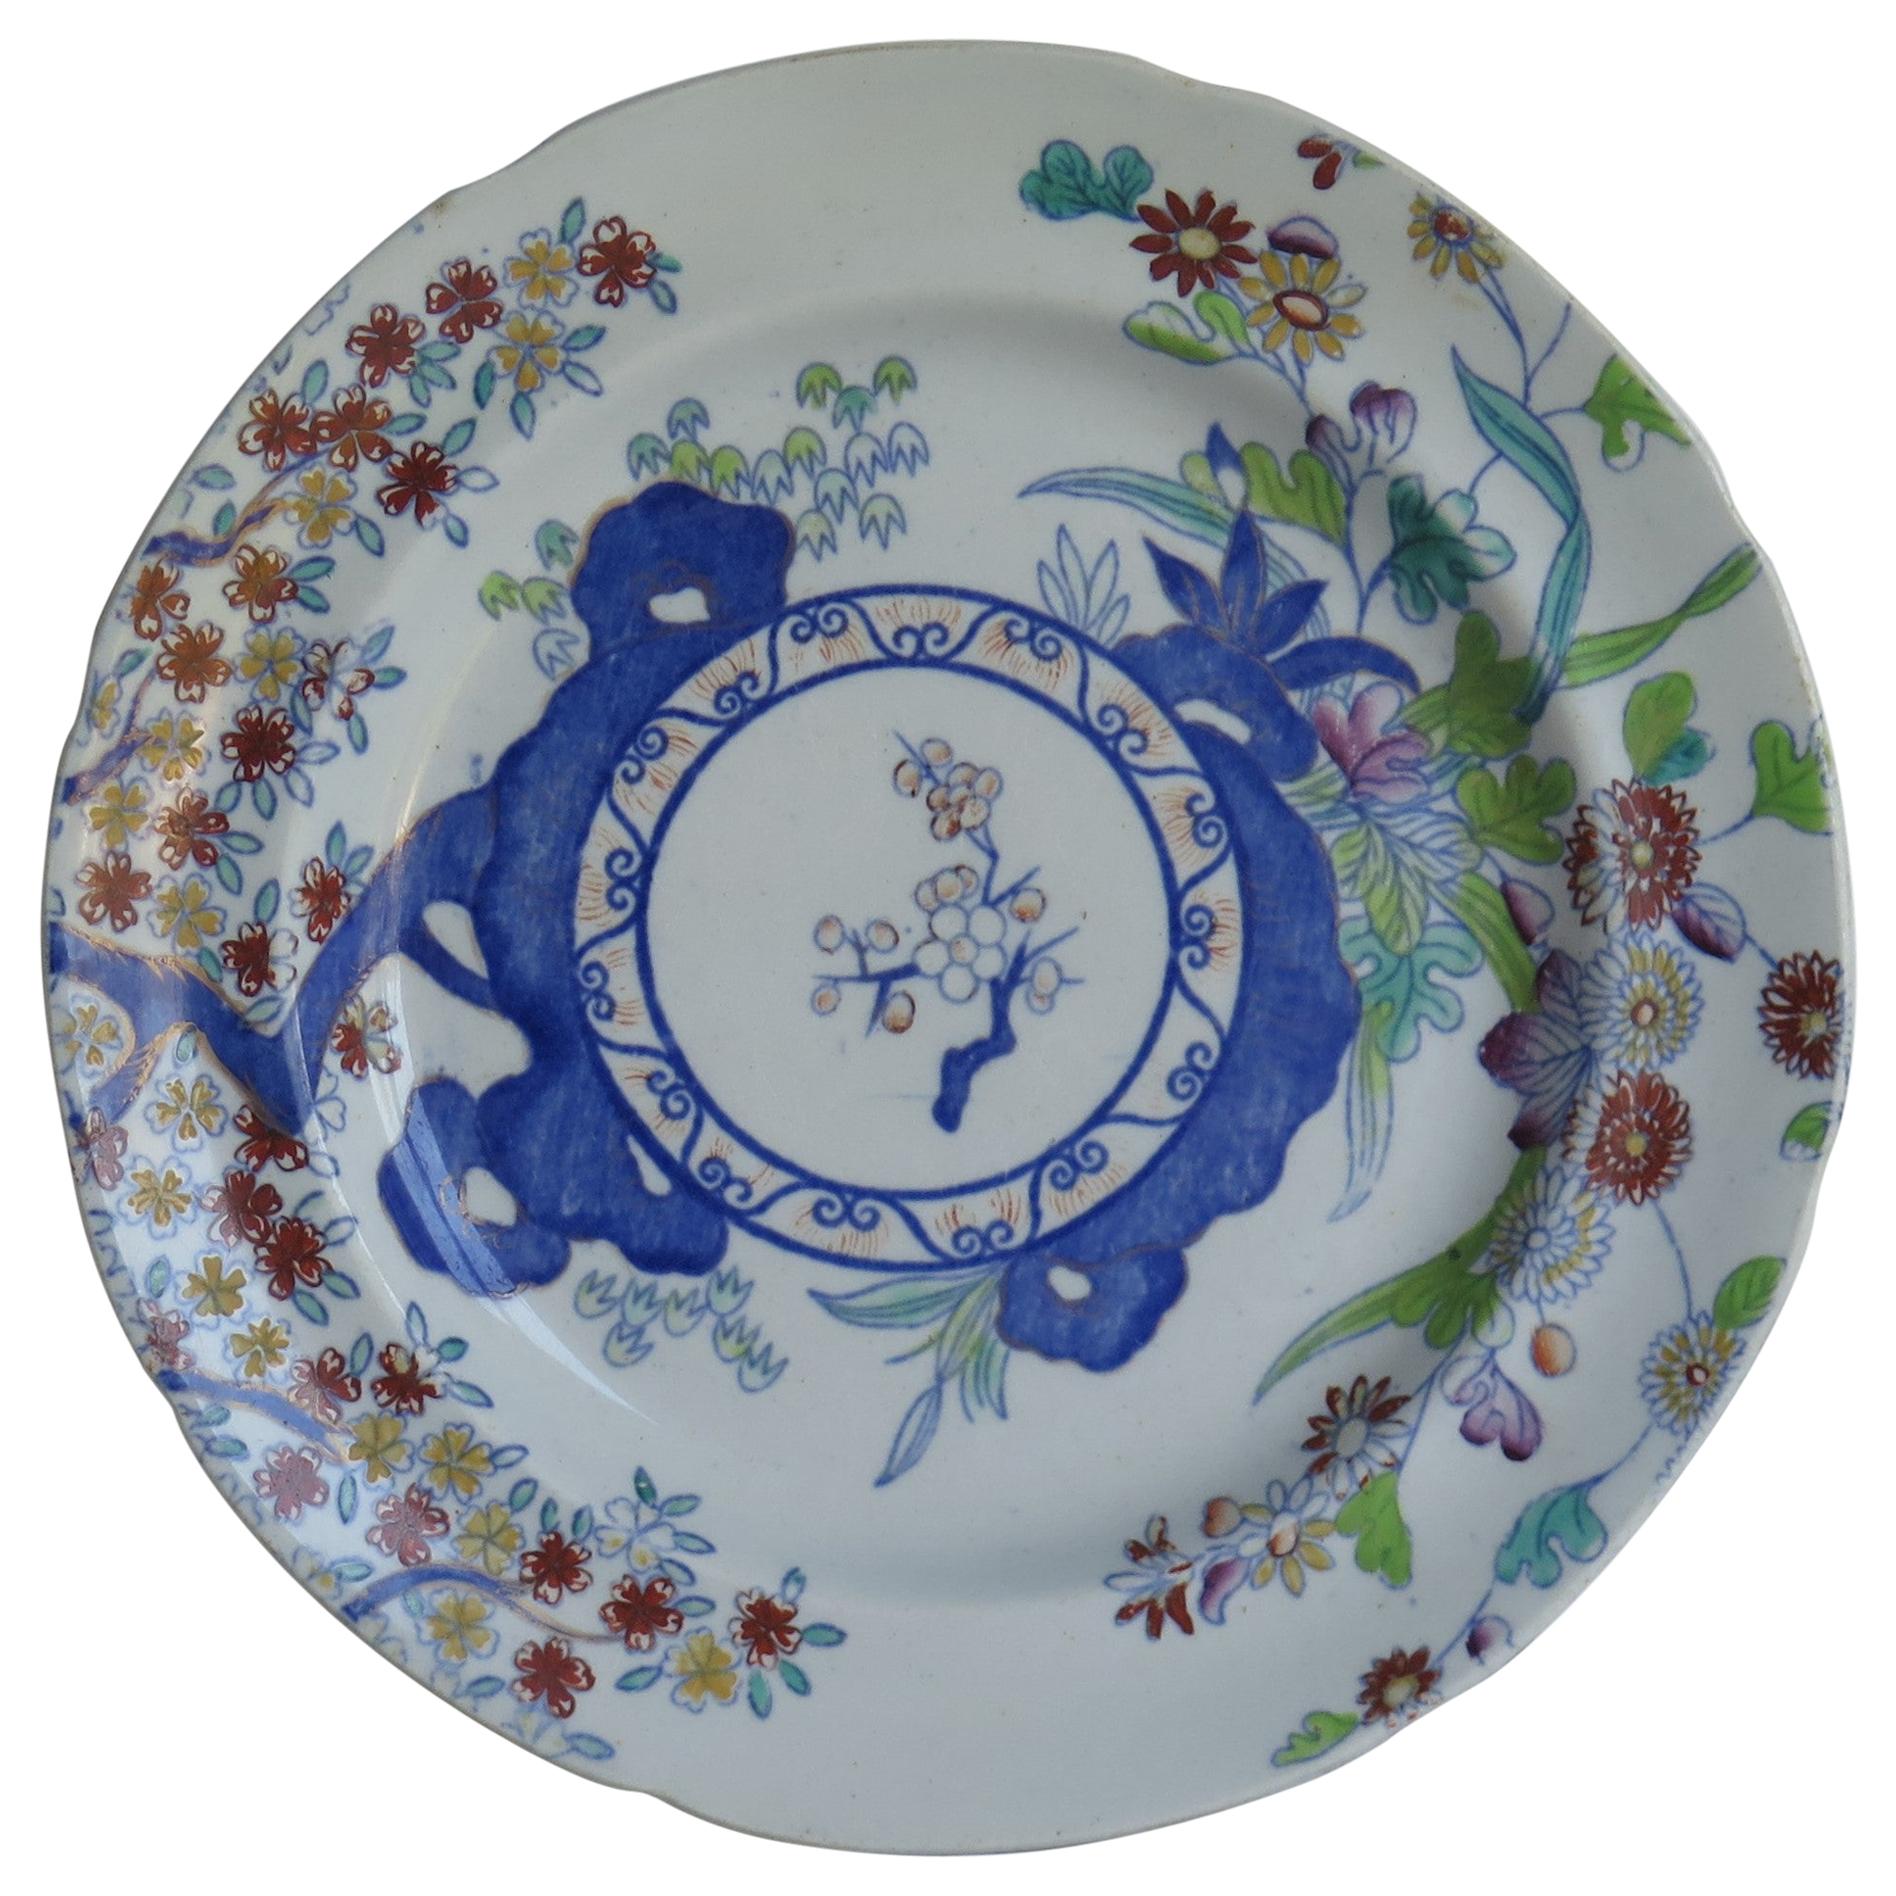 Plate by Copeland Late Spode in Japanese Kakiemon Pattern No. 2117, circa 1850